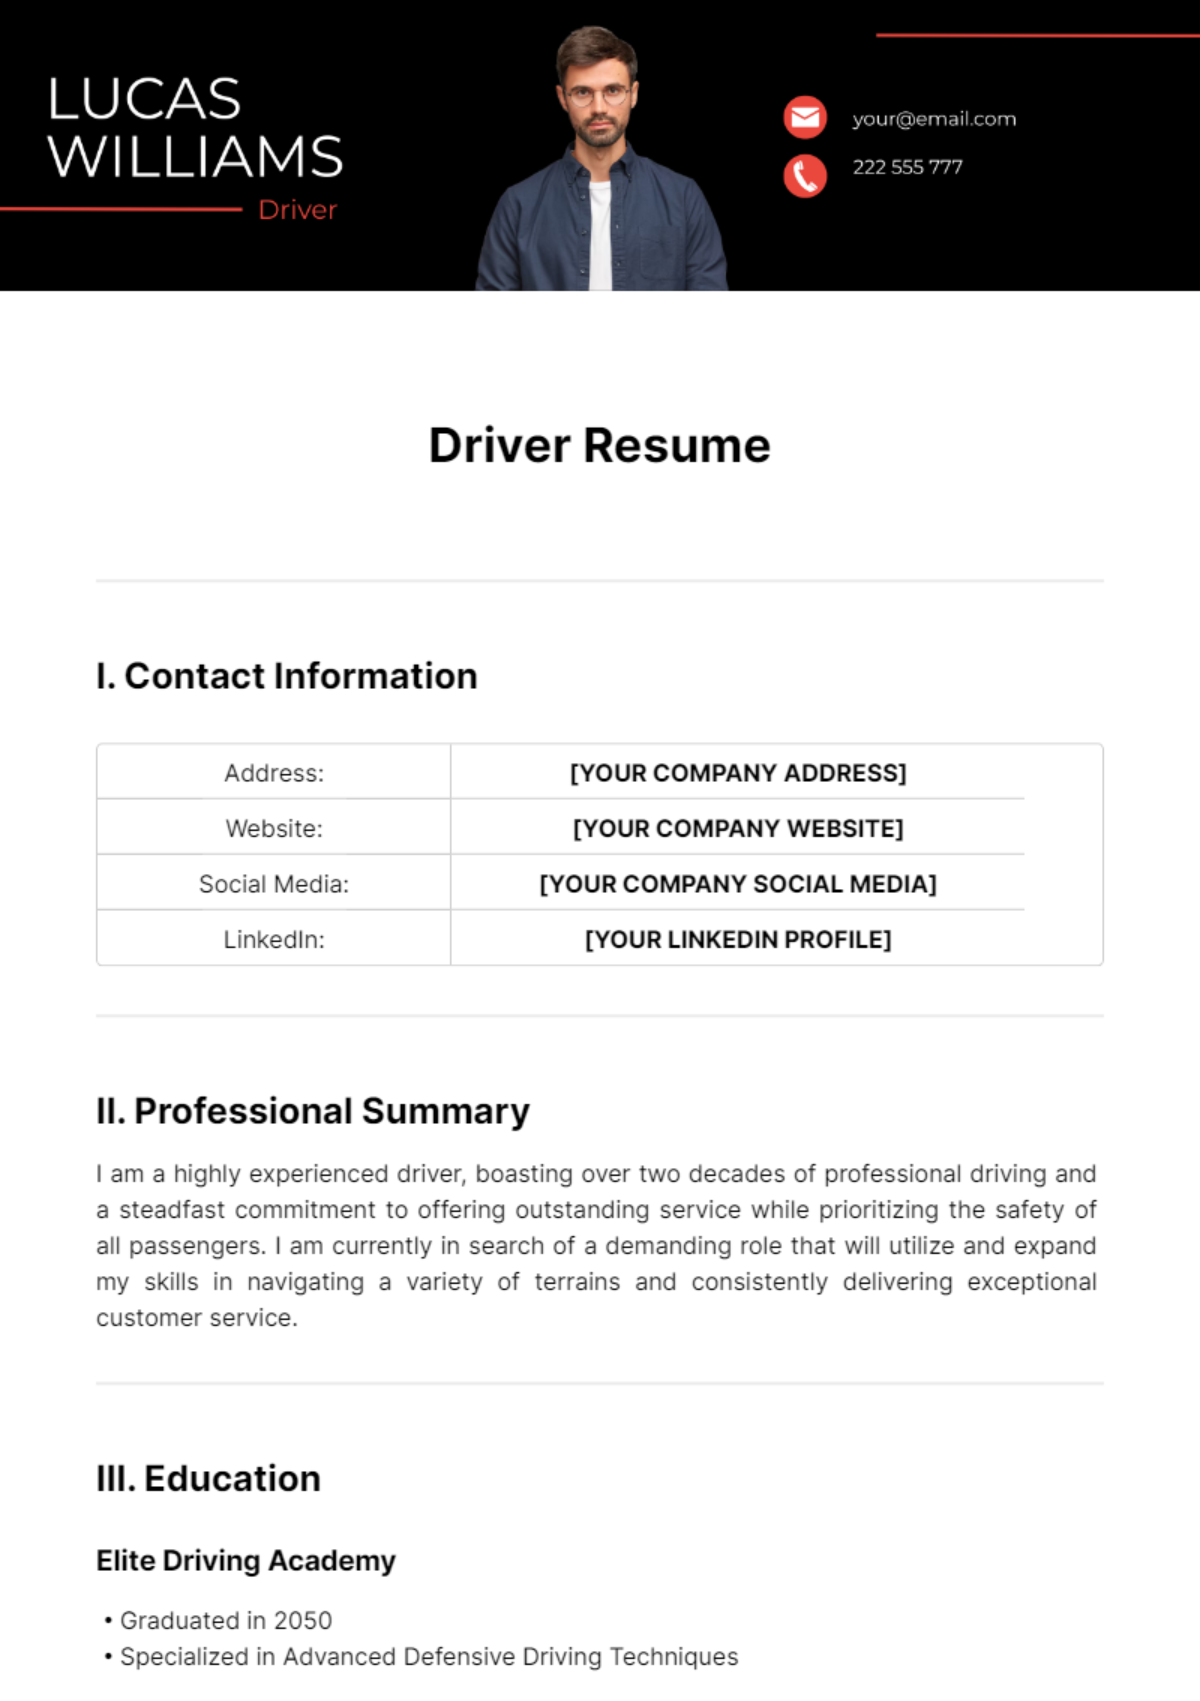 Driver Resume Template